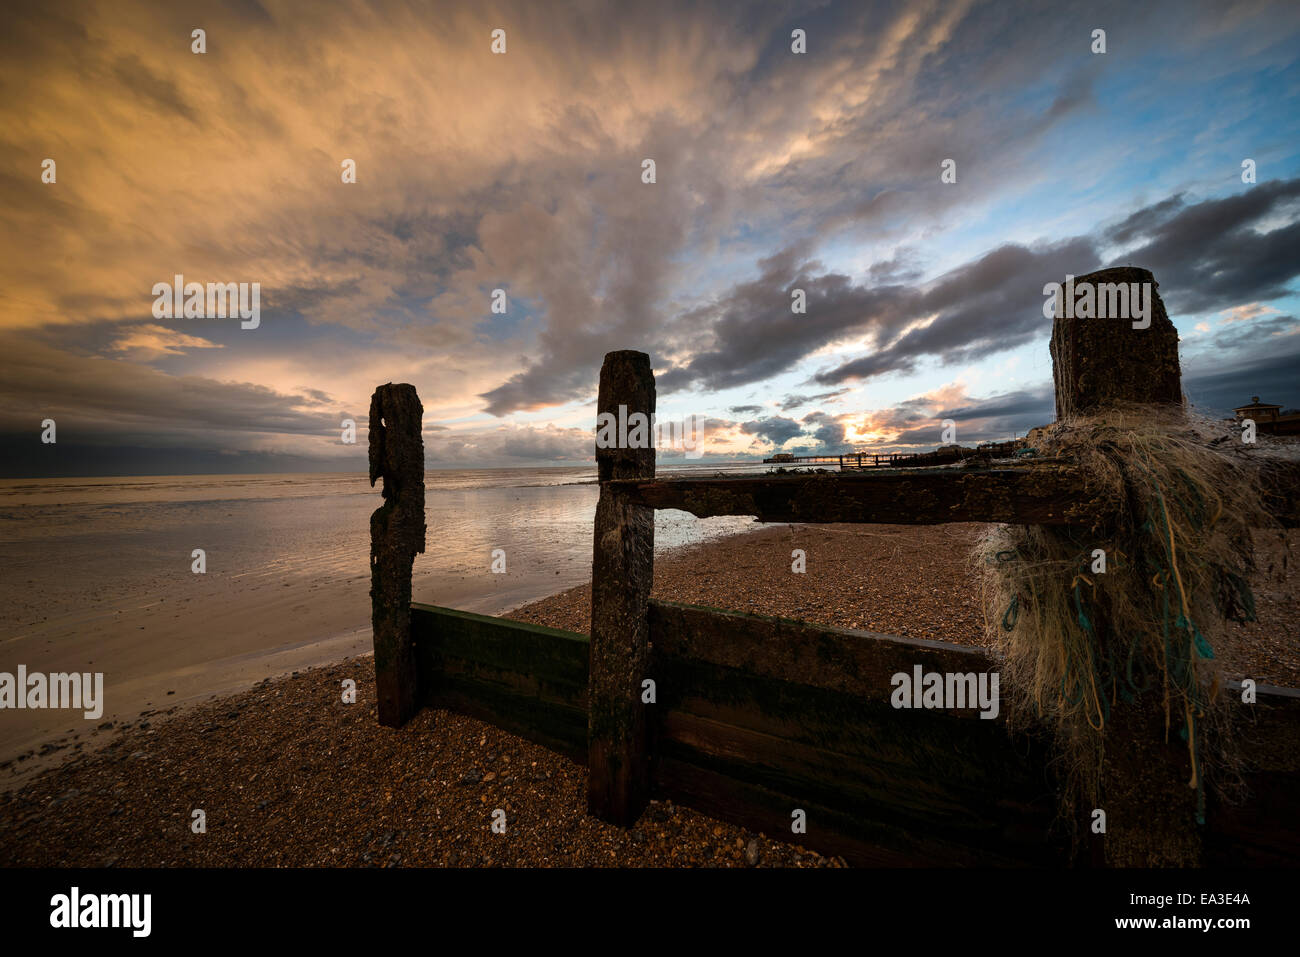 Awesome nuvole sopra Worthing Beach, West Sussex, Regno Unito Foto Stock